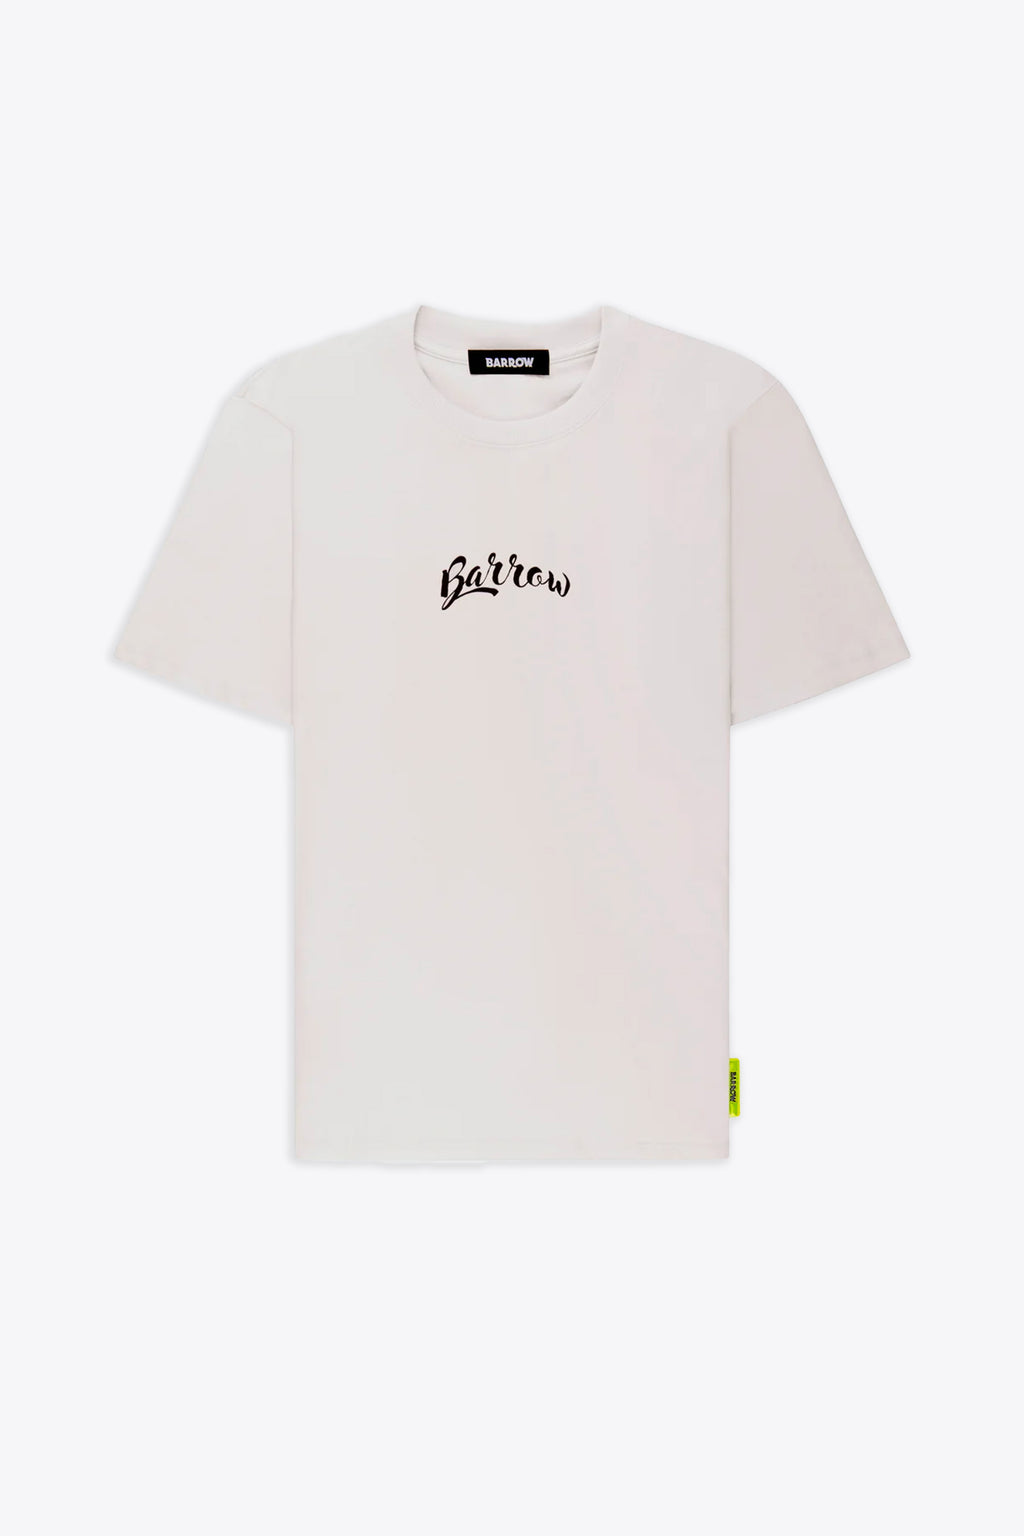 alt-image__Off-white-t-shirt-with-front-italic-logo-and-back-graphic-print